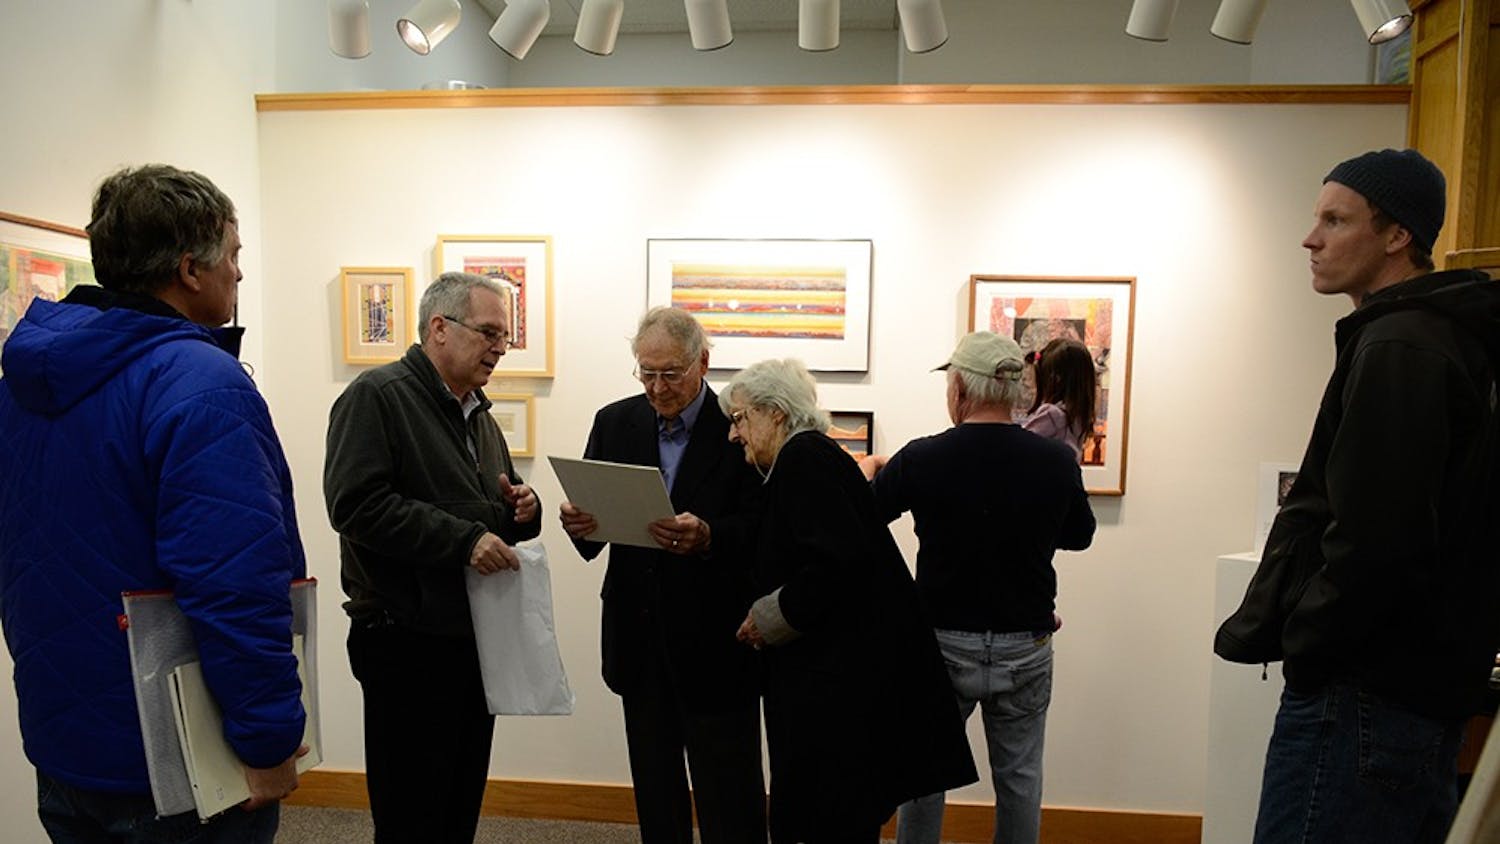 The By Hand Gallery hosts an opening reception for their new show “Rudy Pozzatti” on Friday. The show highlights new work from fine-art printmaker Rudy Pozzatti. By Hand Gallery is one of nine downtown galleries who are participanting in this year's Bloomington Gallery Walk.